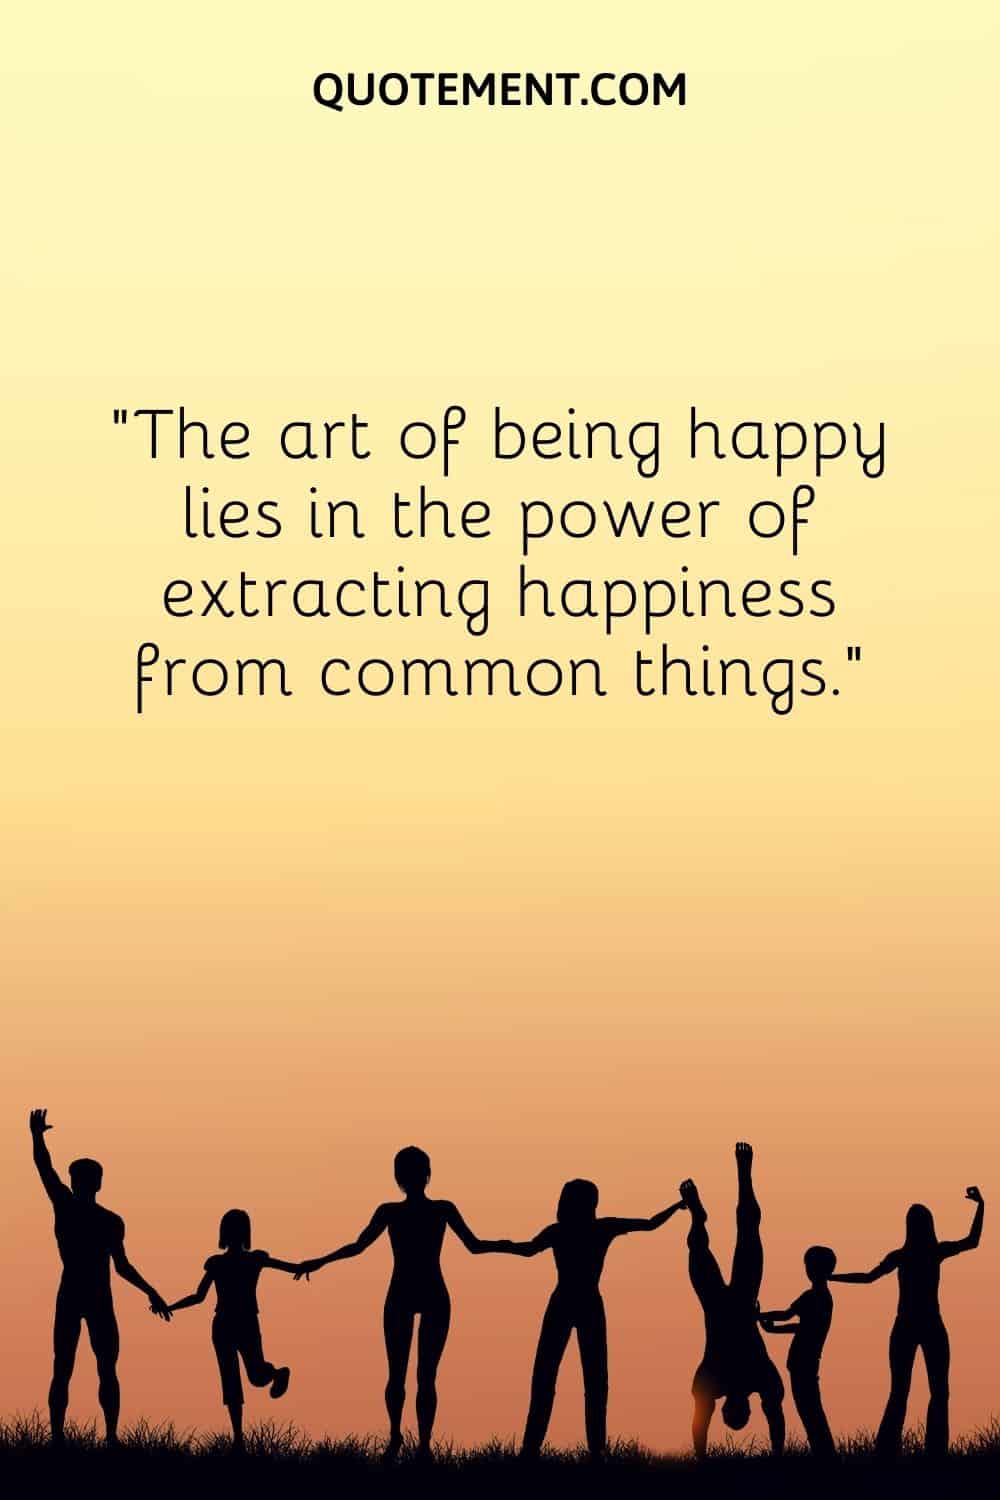 The art of being happy lies in the power of extracting happiness from common things